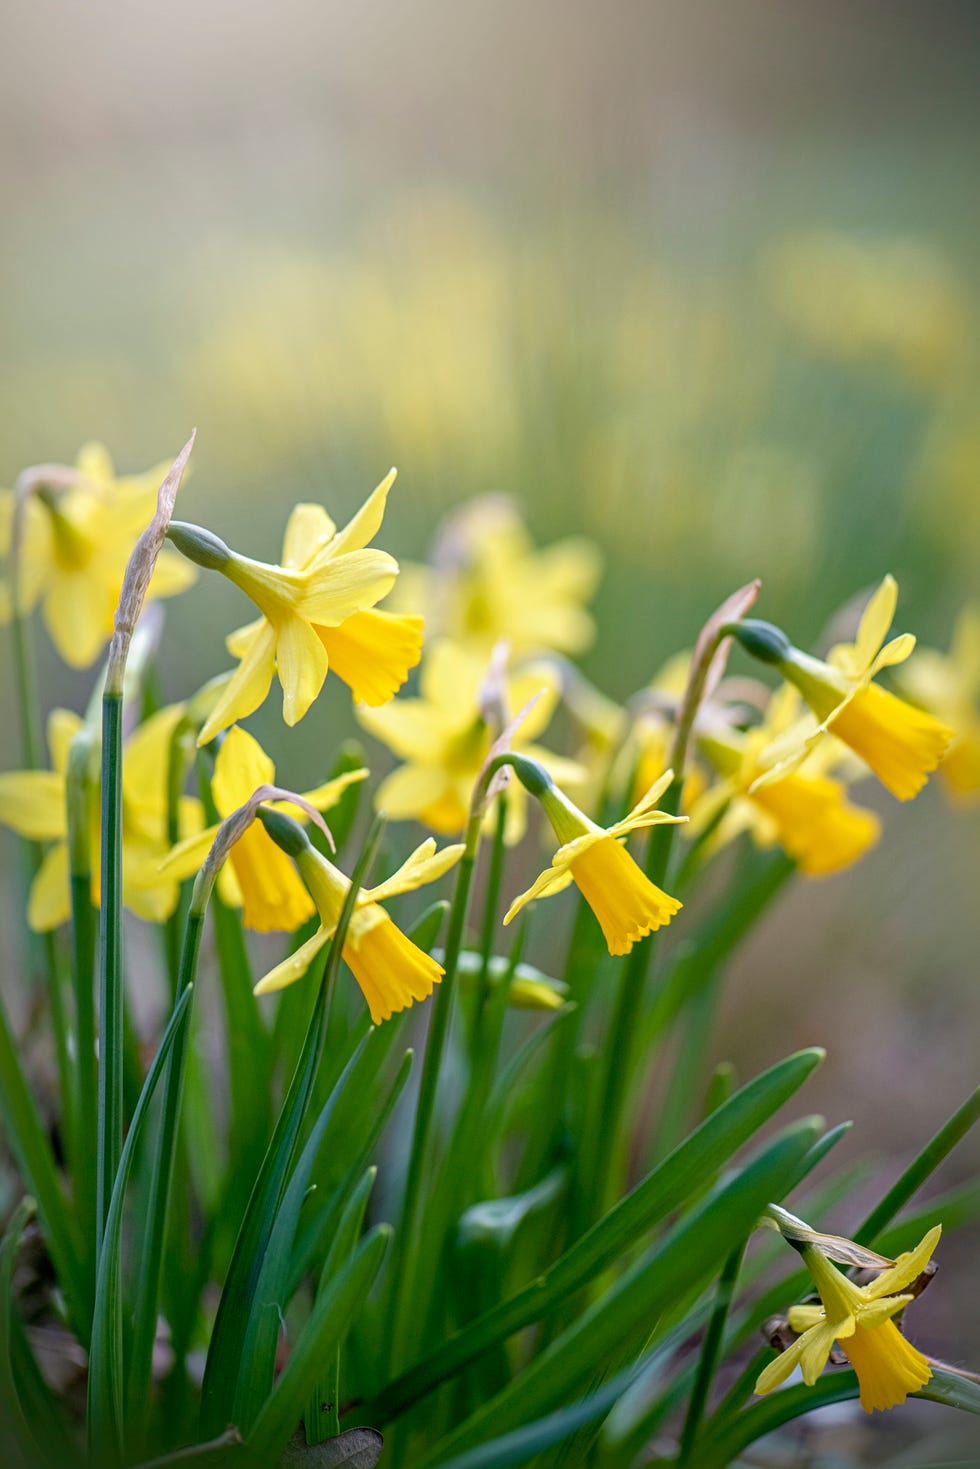 beautiful spring flowering yellow daffodil flowers also known as narcissus, in soft sunshine